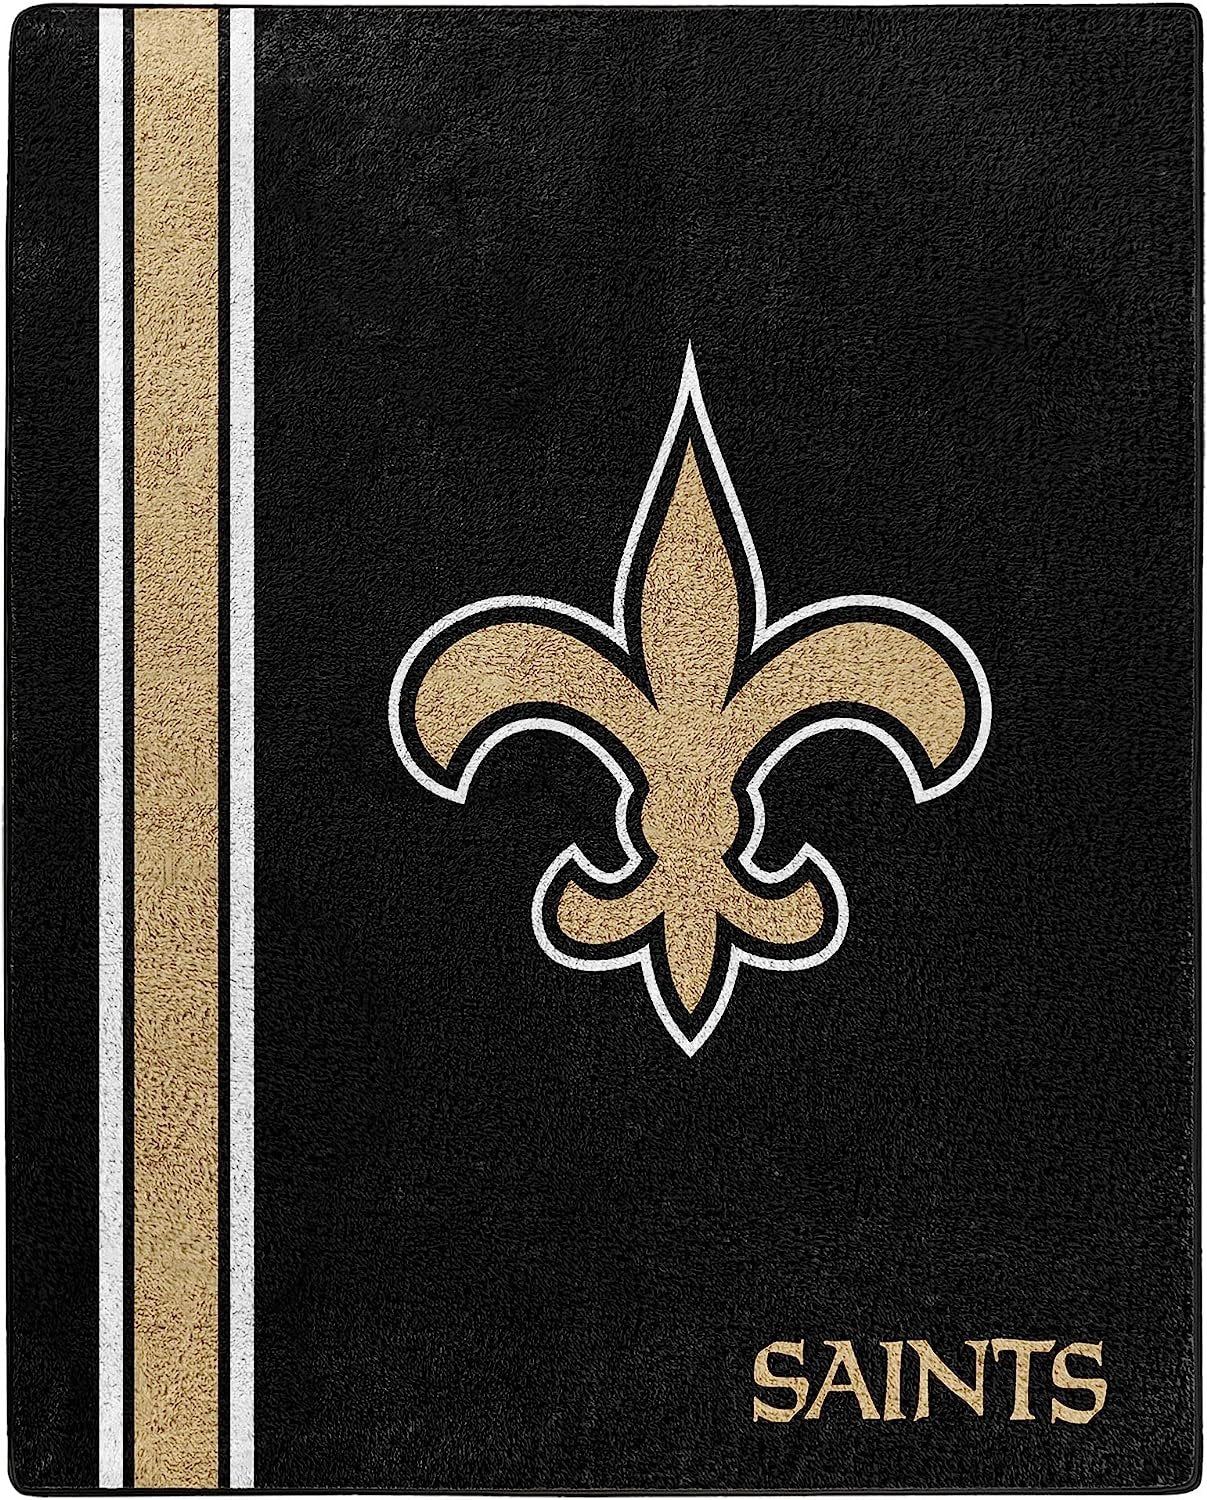 New Orleans Saints Throw Blanket, Polyester Super Soft Sherpa, 50X60 Inch, Jersey Design